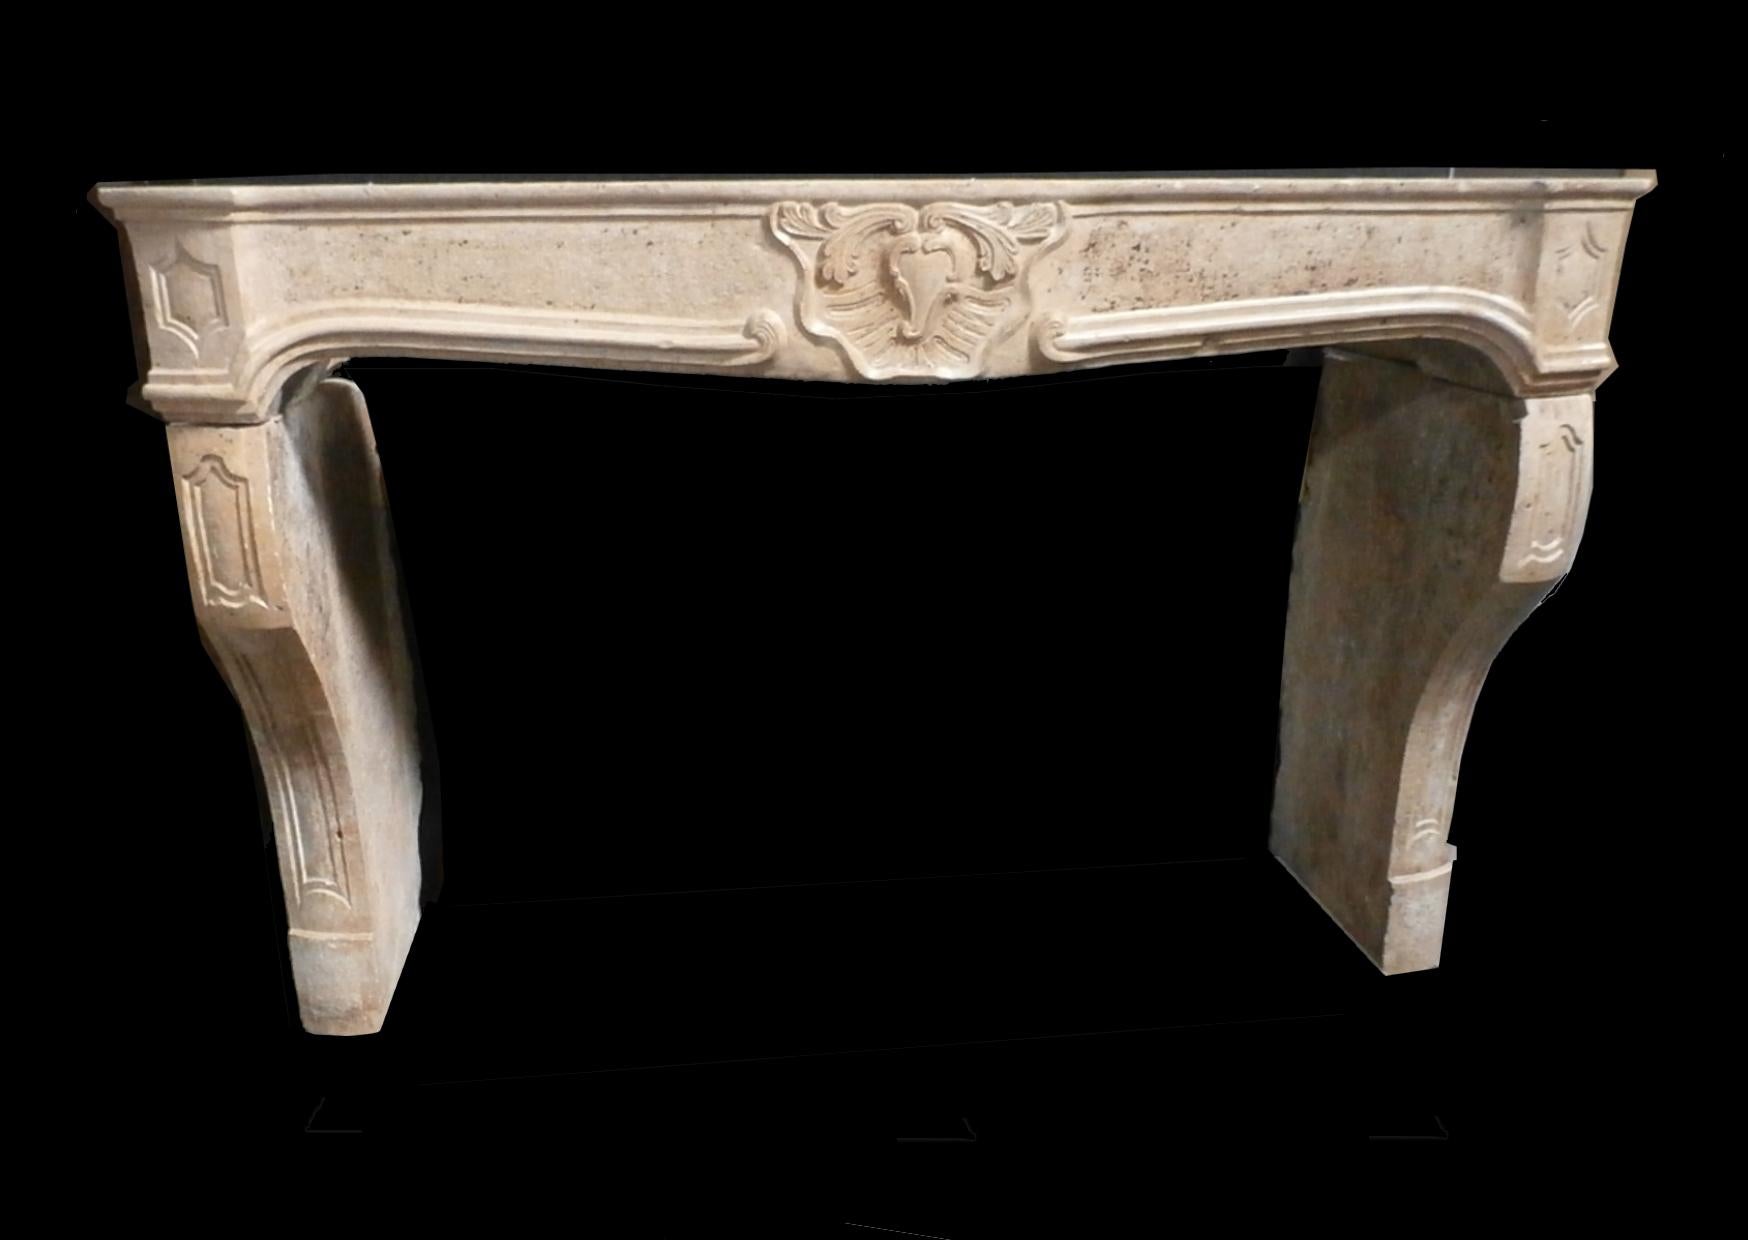 Captivating fireplace mantel with ornamental carving of exceptional quality. With its beautiful curved legs this fireplace mantel is the perfect piece to complement your classy, sophisticated interior.

The most captivating beauty of this fireplace